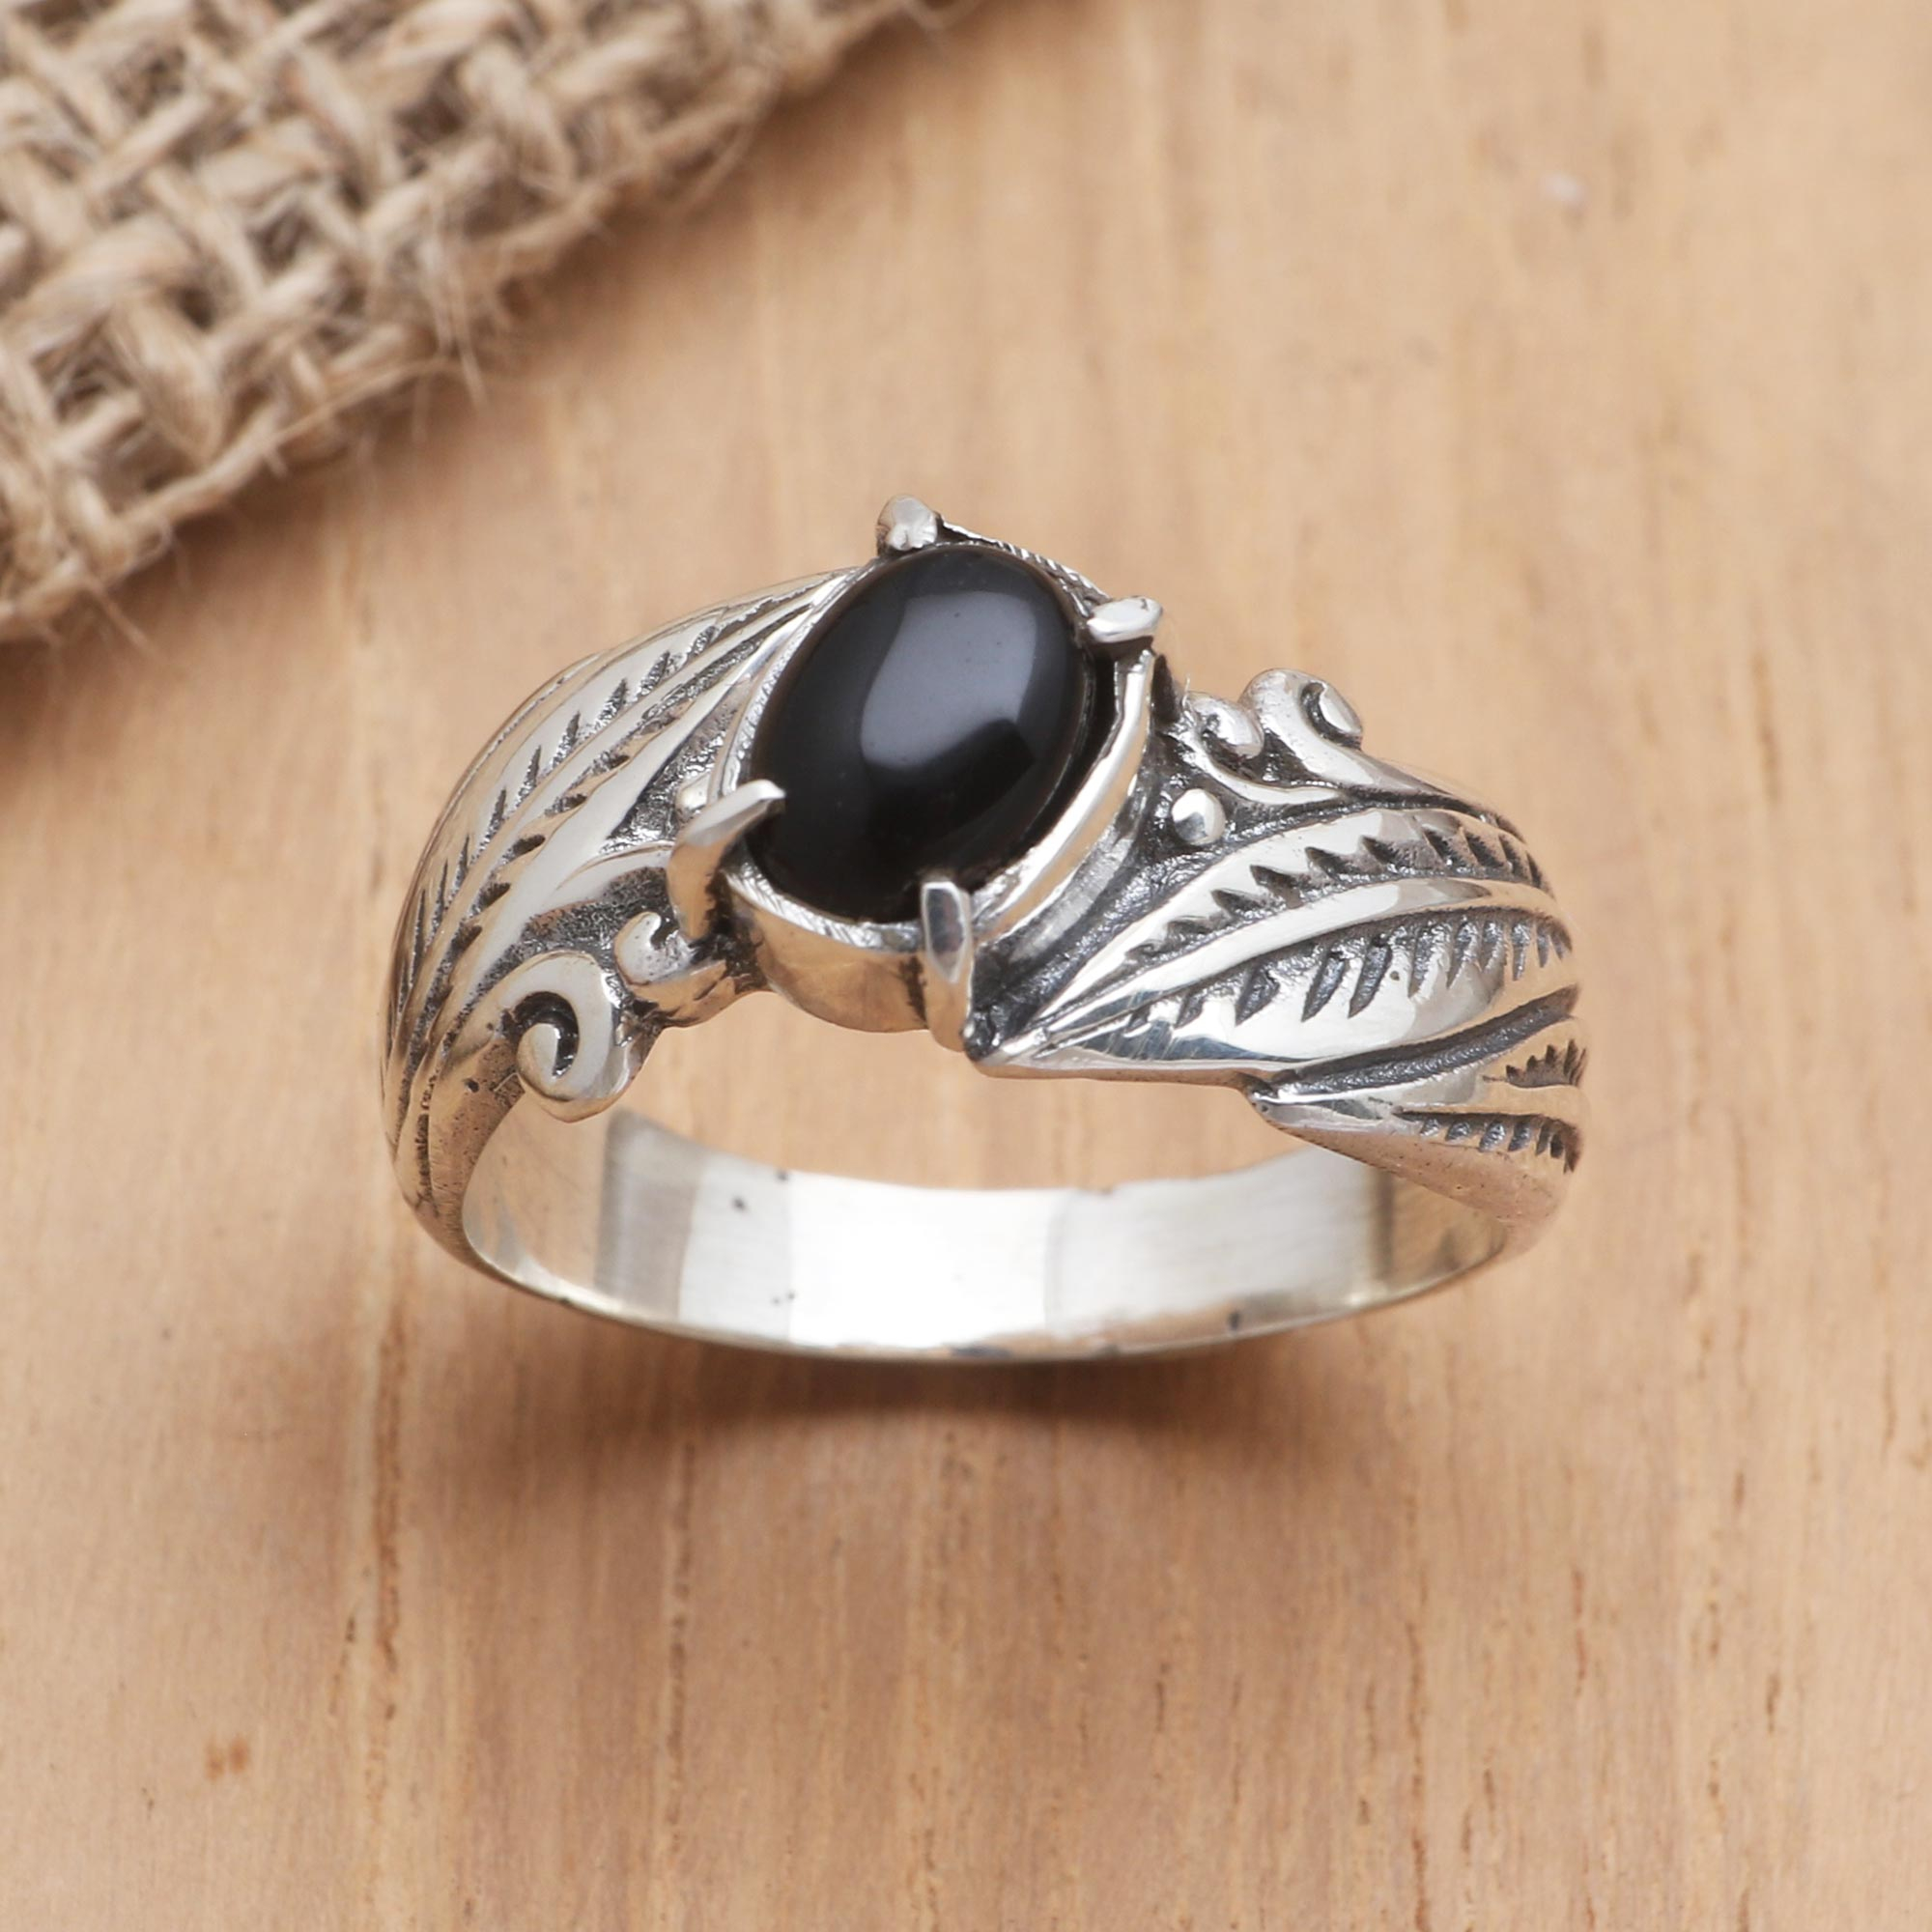 Sterling Silver and Onyx Single Stone Ring - Frangipani Leaves | NOVICA